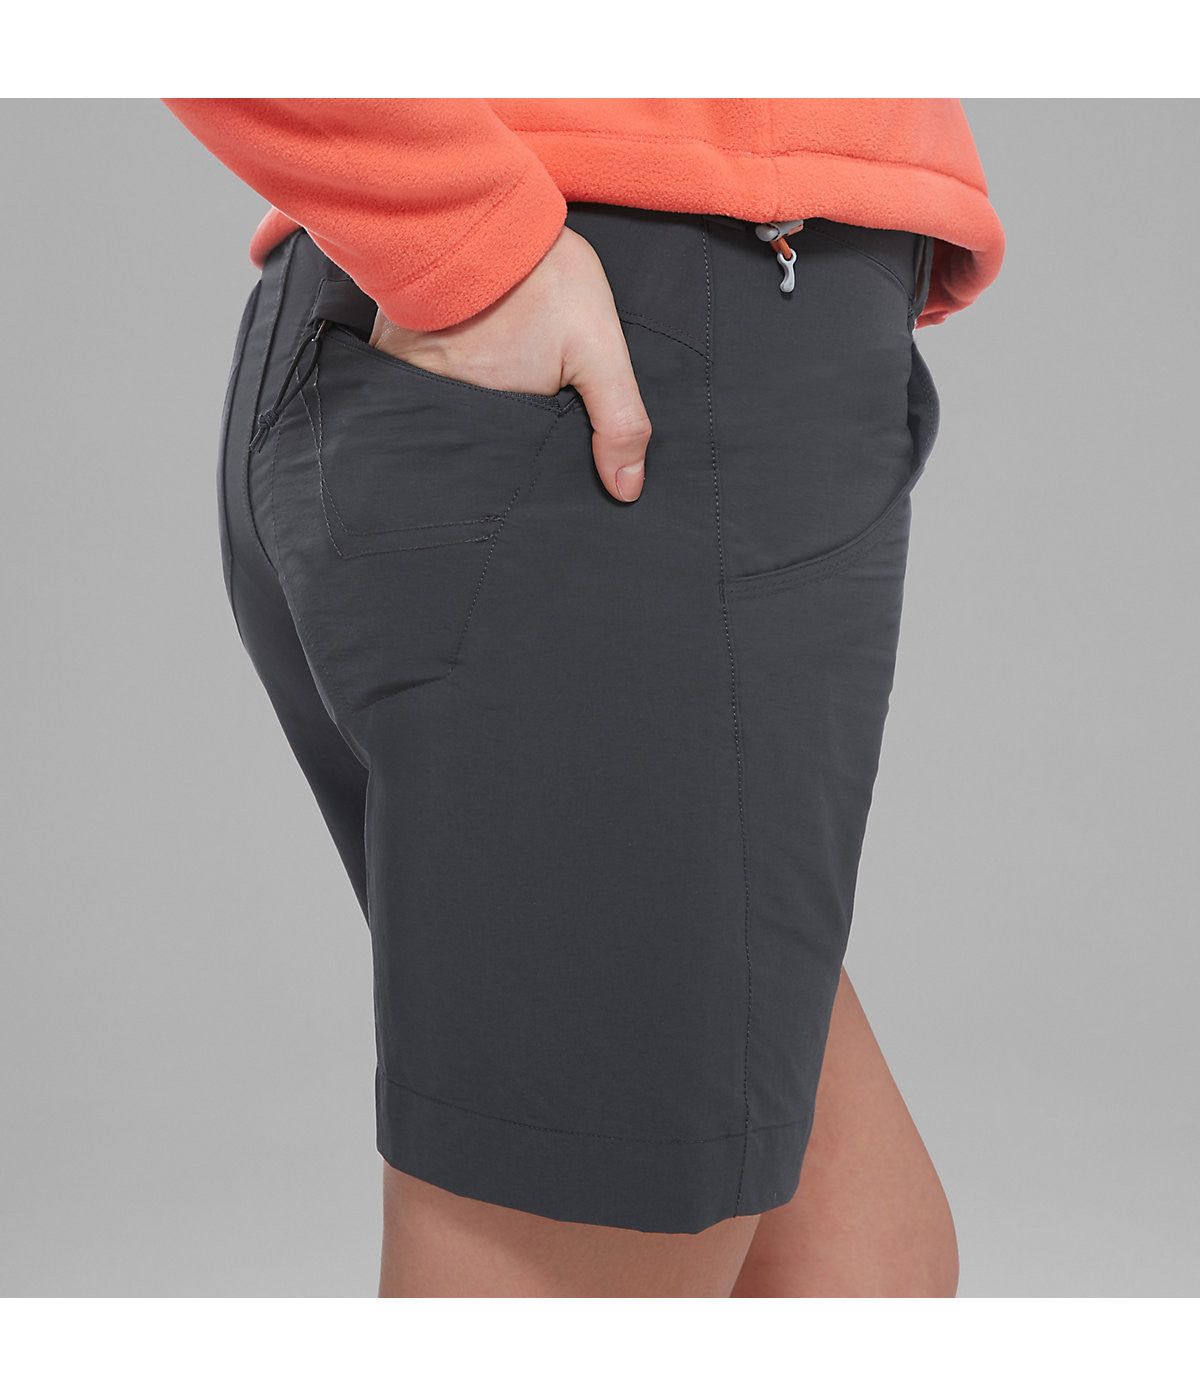 The North Face Womens Exploration Shorts